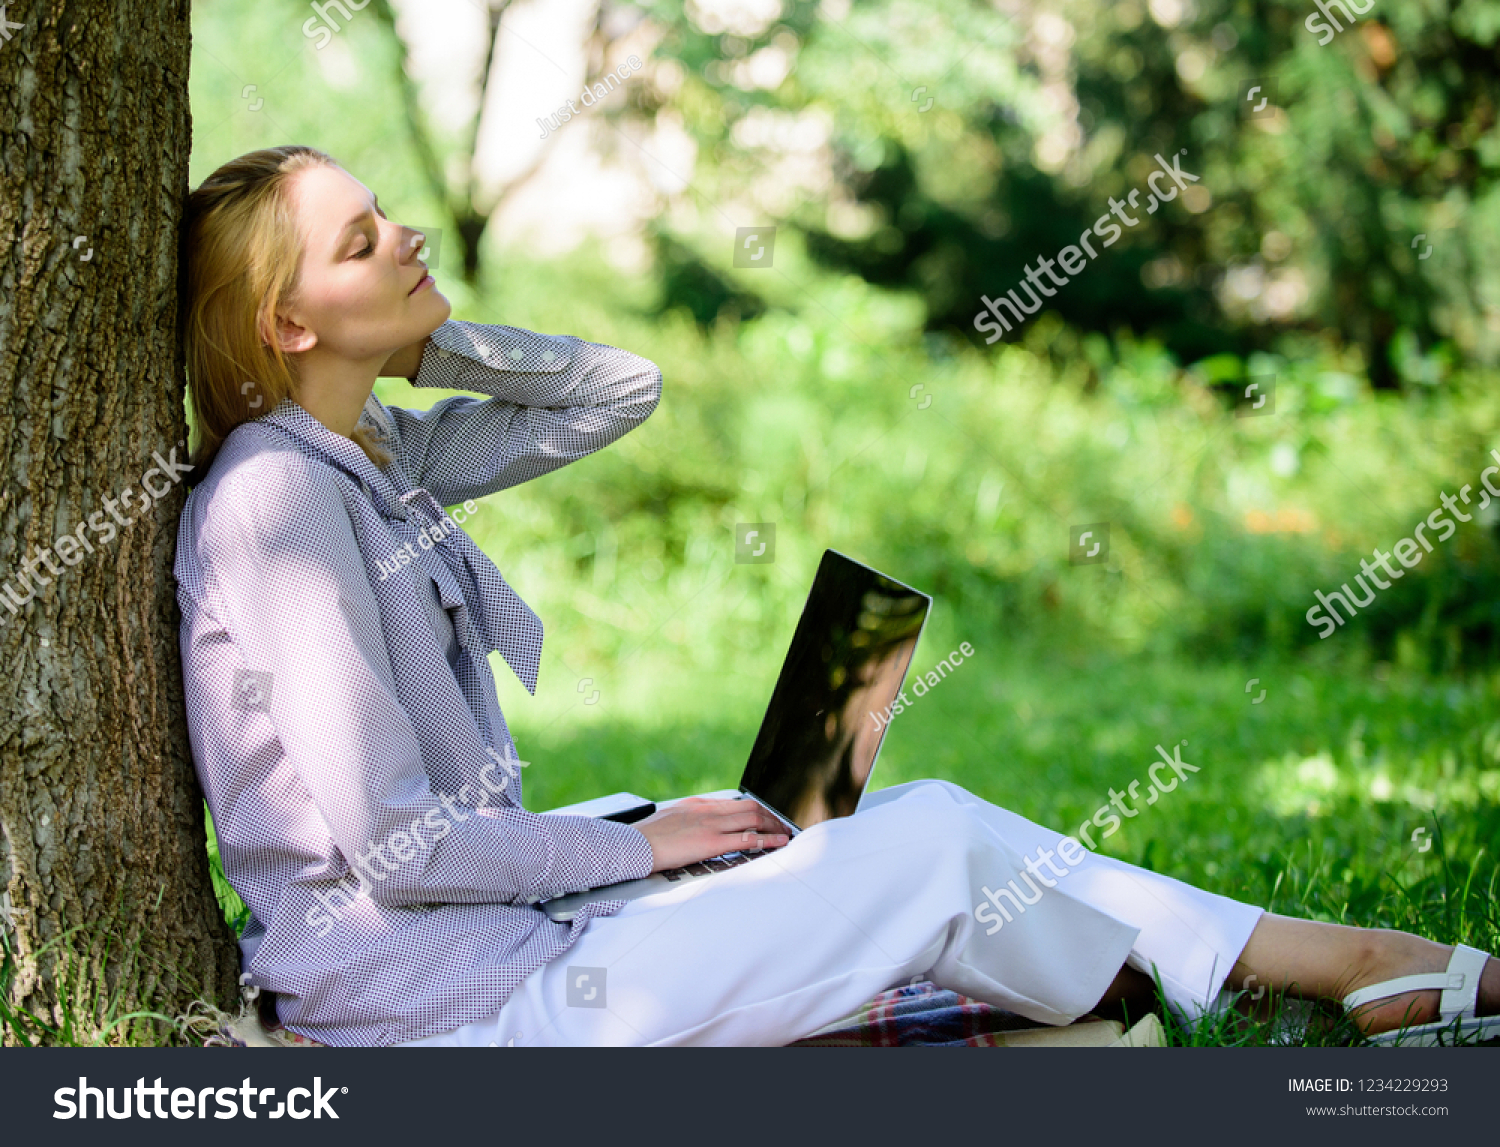 Work outdoors benefits. Woman with laptop work outdoors lean tree. Minute for relax. Education technology and internet concept. Girl work with laptop in park sit on grass. Natural environment office. #1234229293